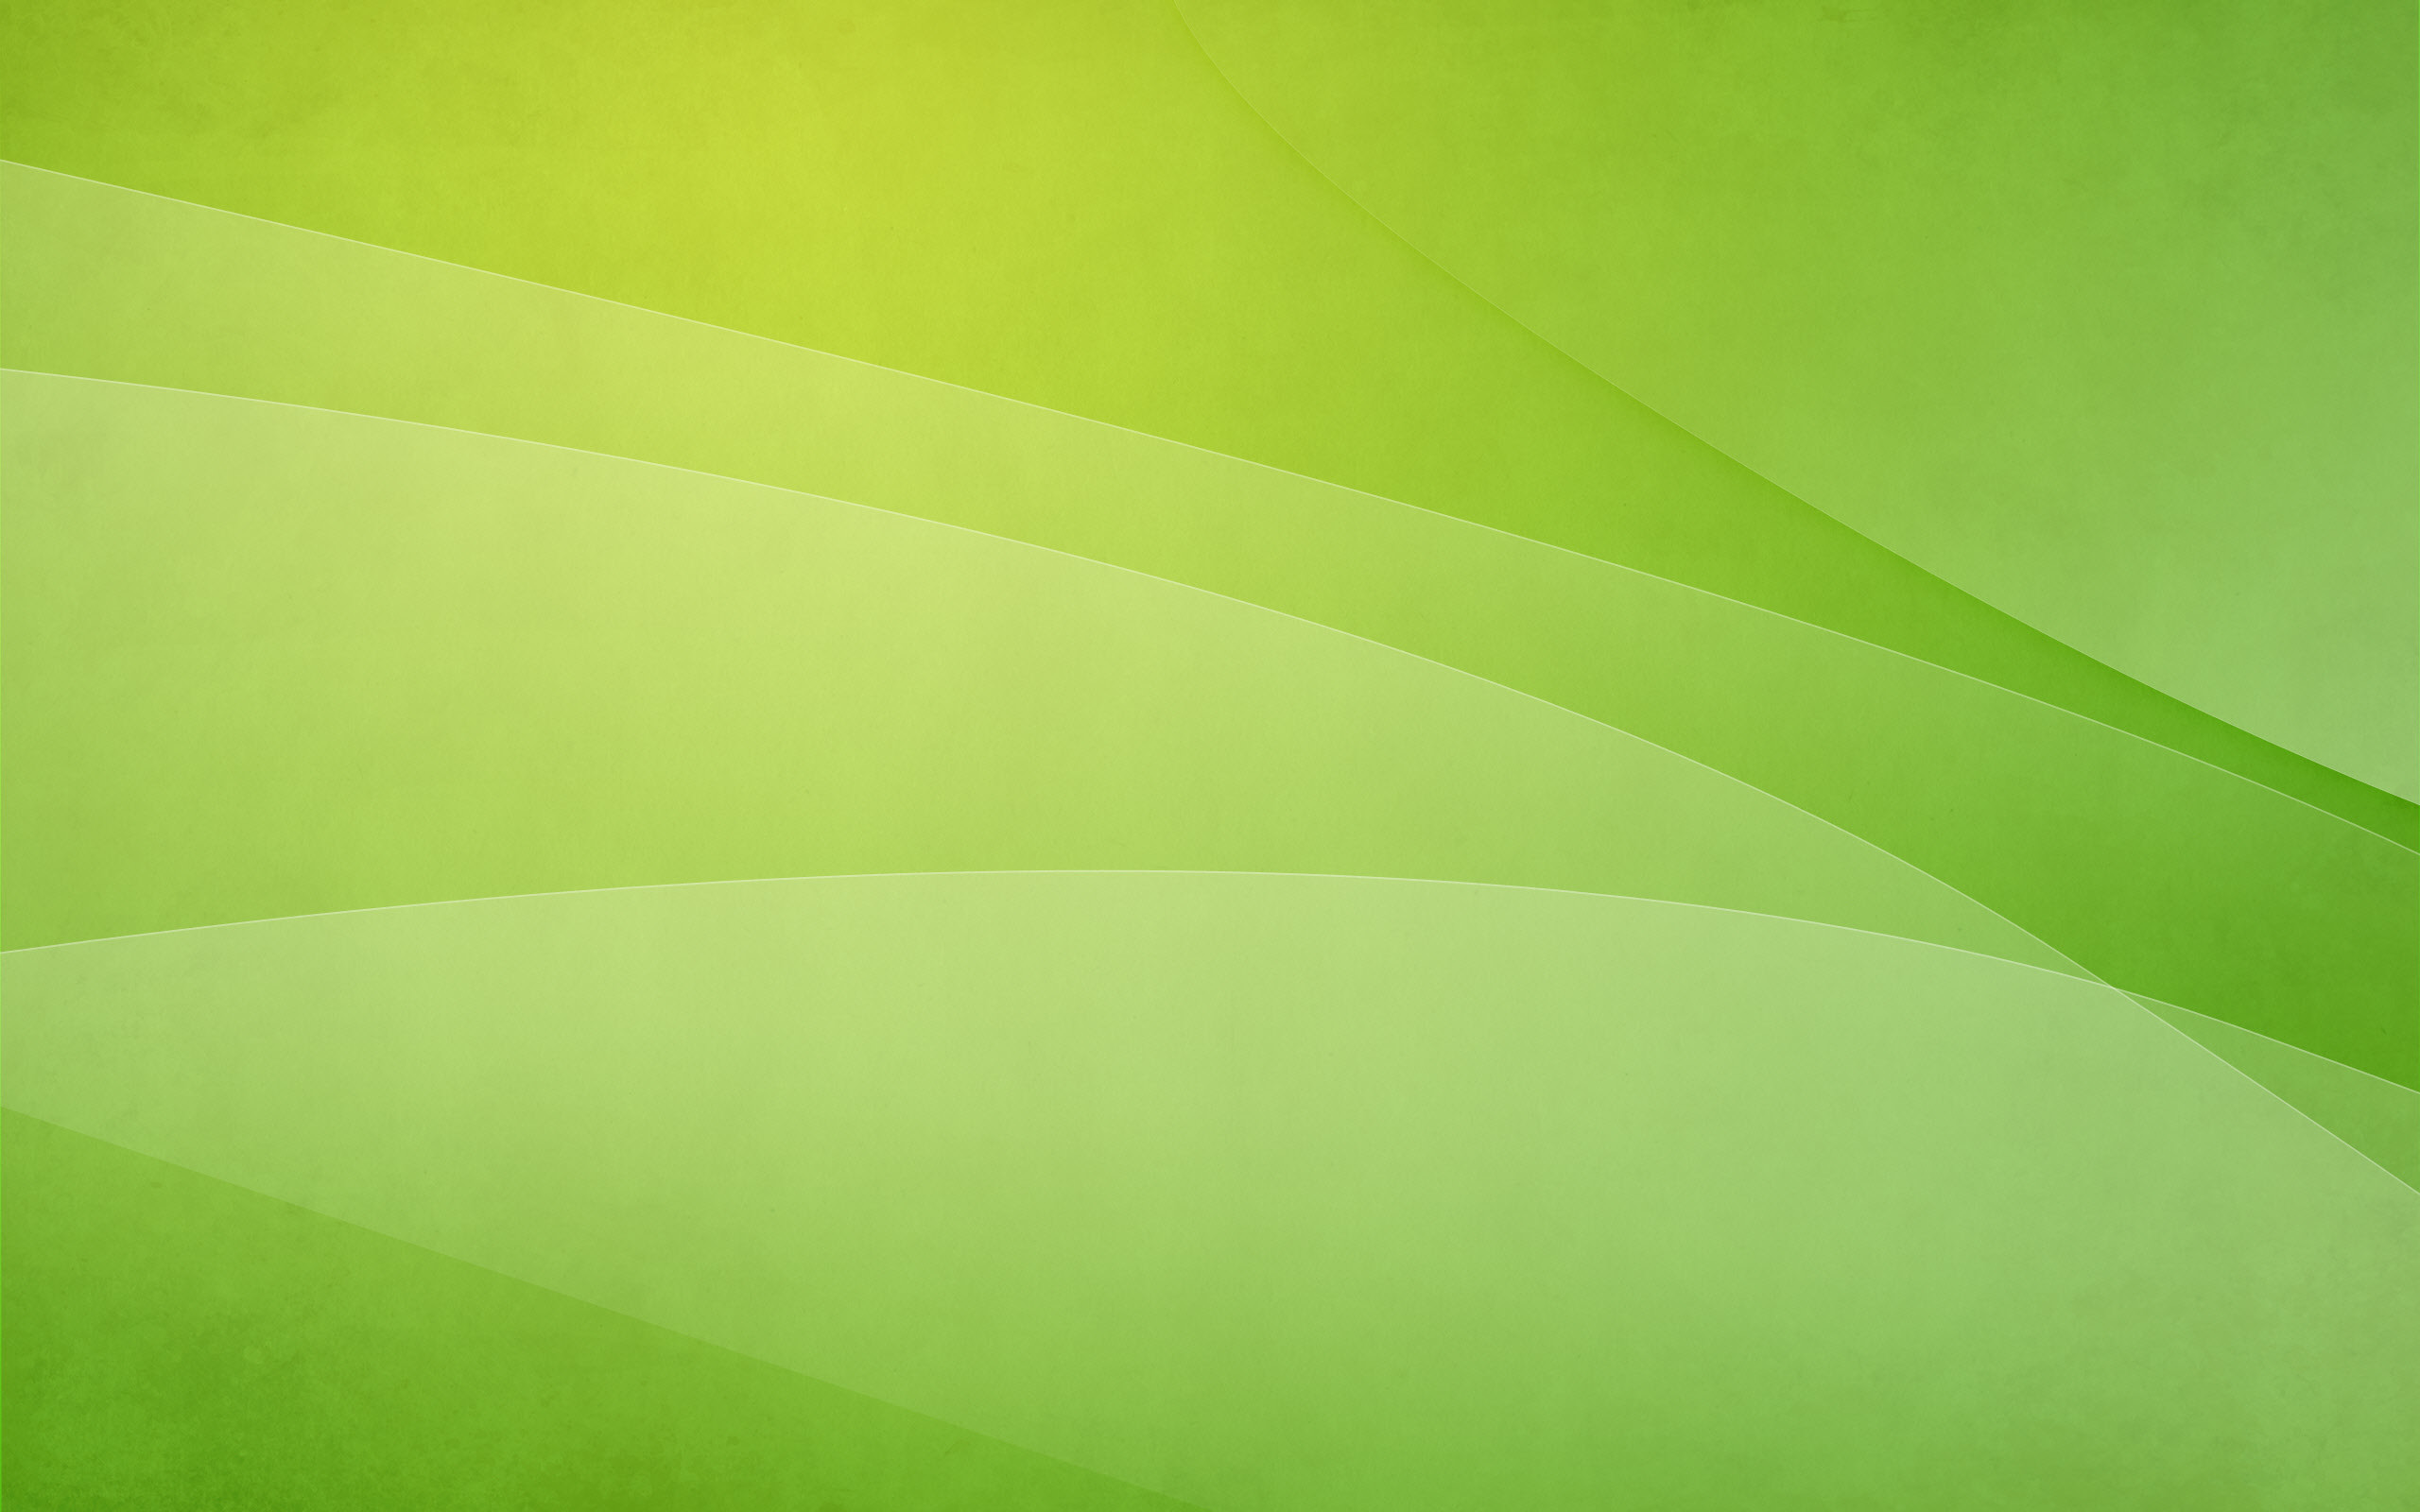 2560x1600 hd lime green background hd desktop wallpapers amazing images background  photos 1080p smart phone background photos download free images ultra hd  2560Ã1600 ...